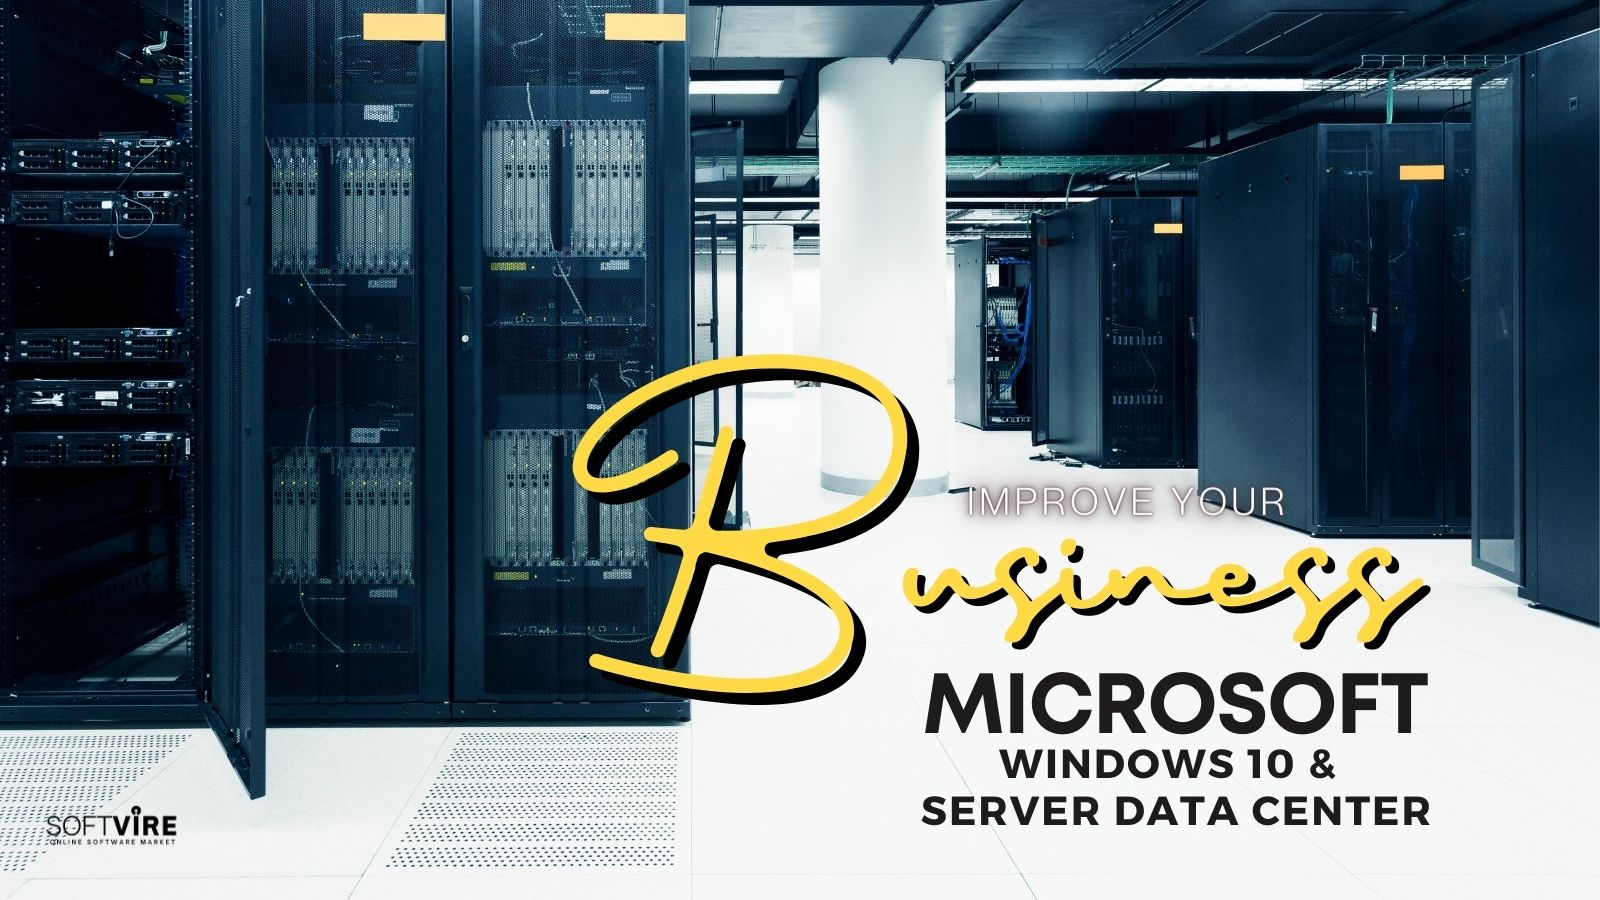 Boost Your Business with - Microsoft Windows 10 and Server Data Center - Twitter - Softvire Global Market